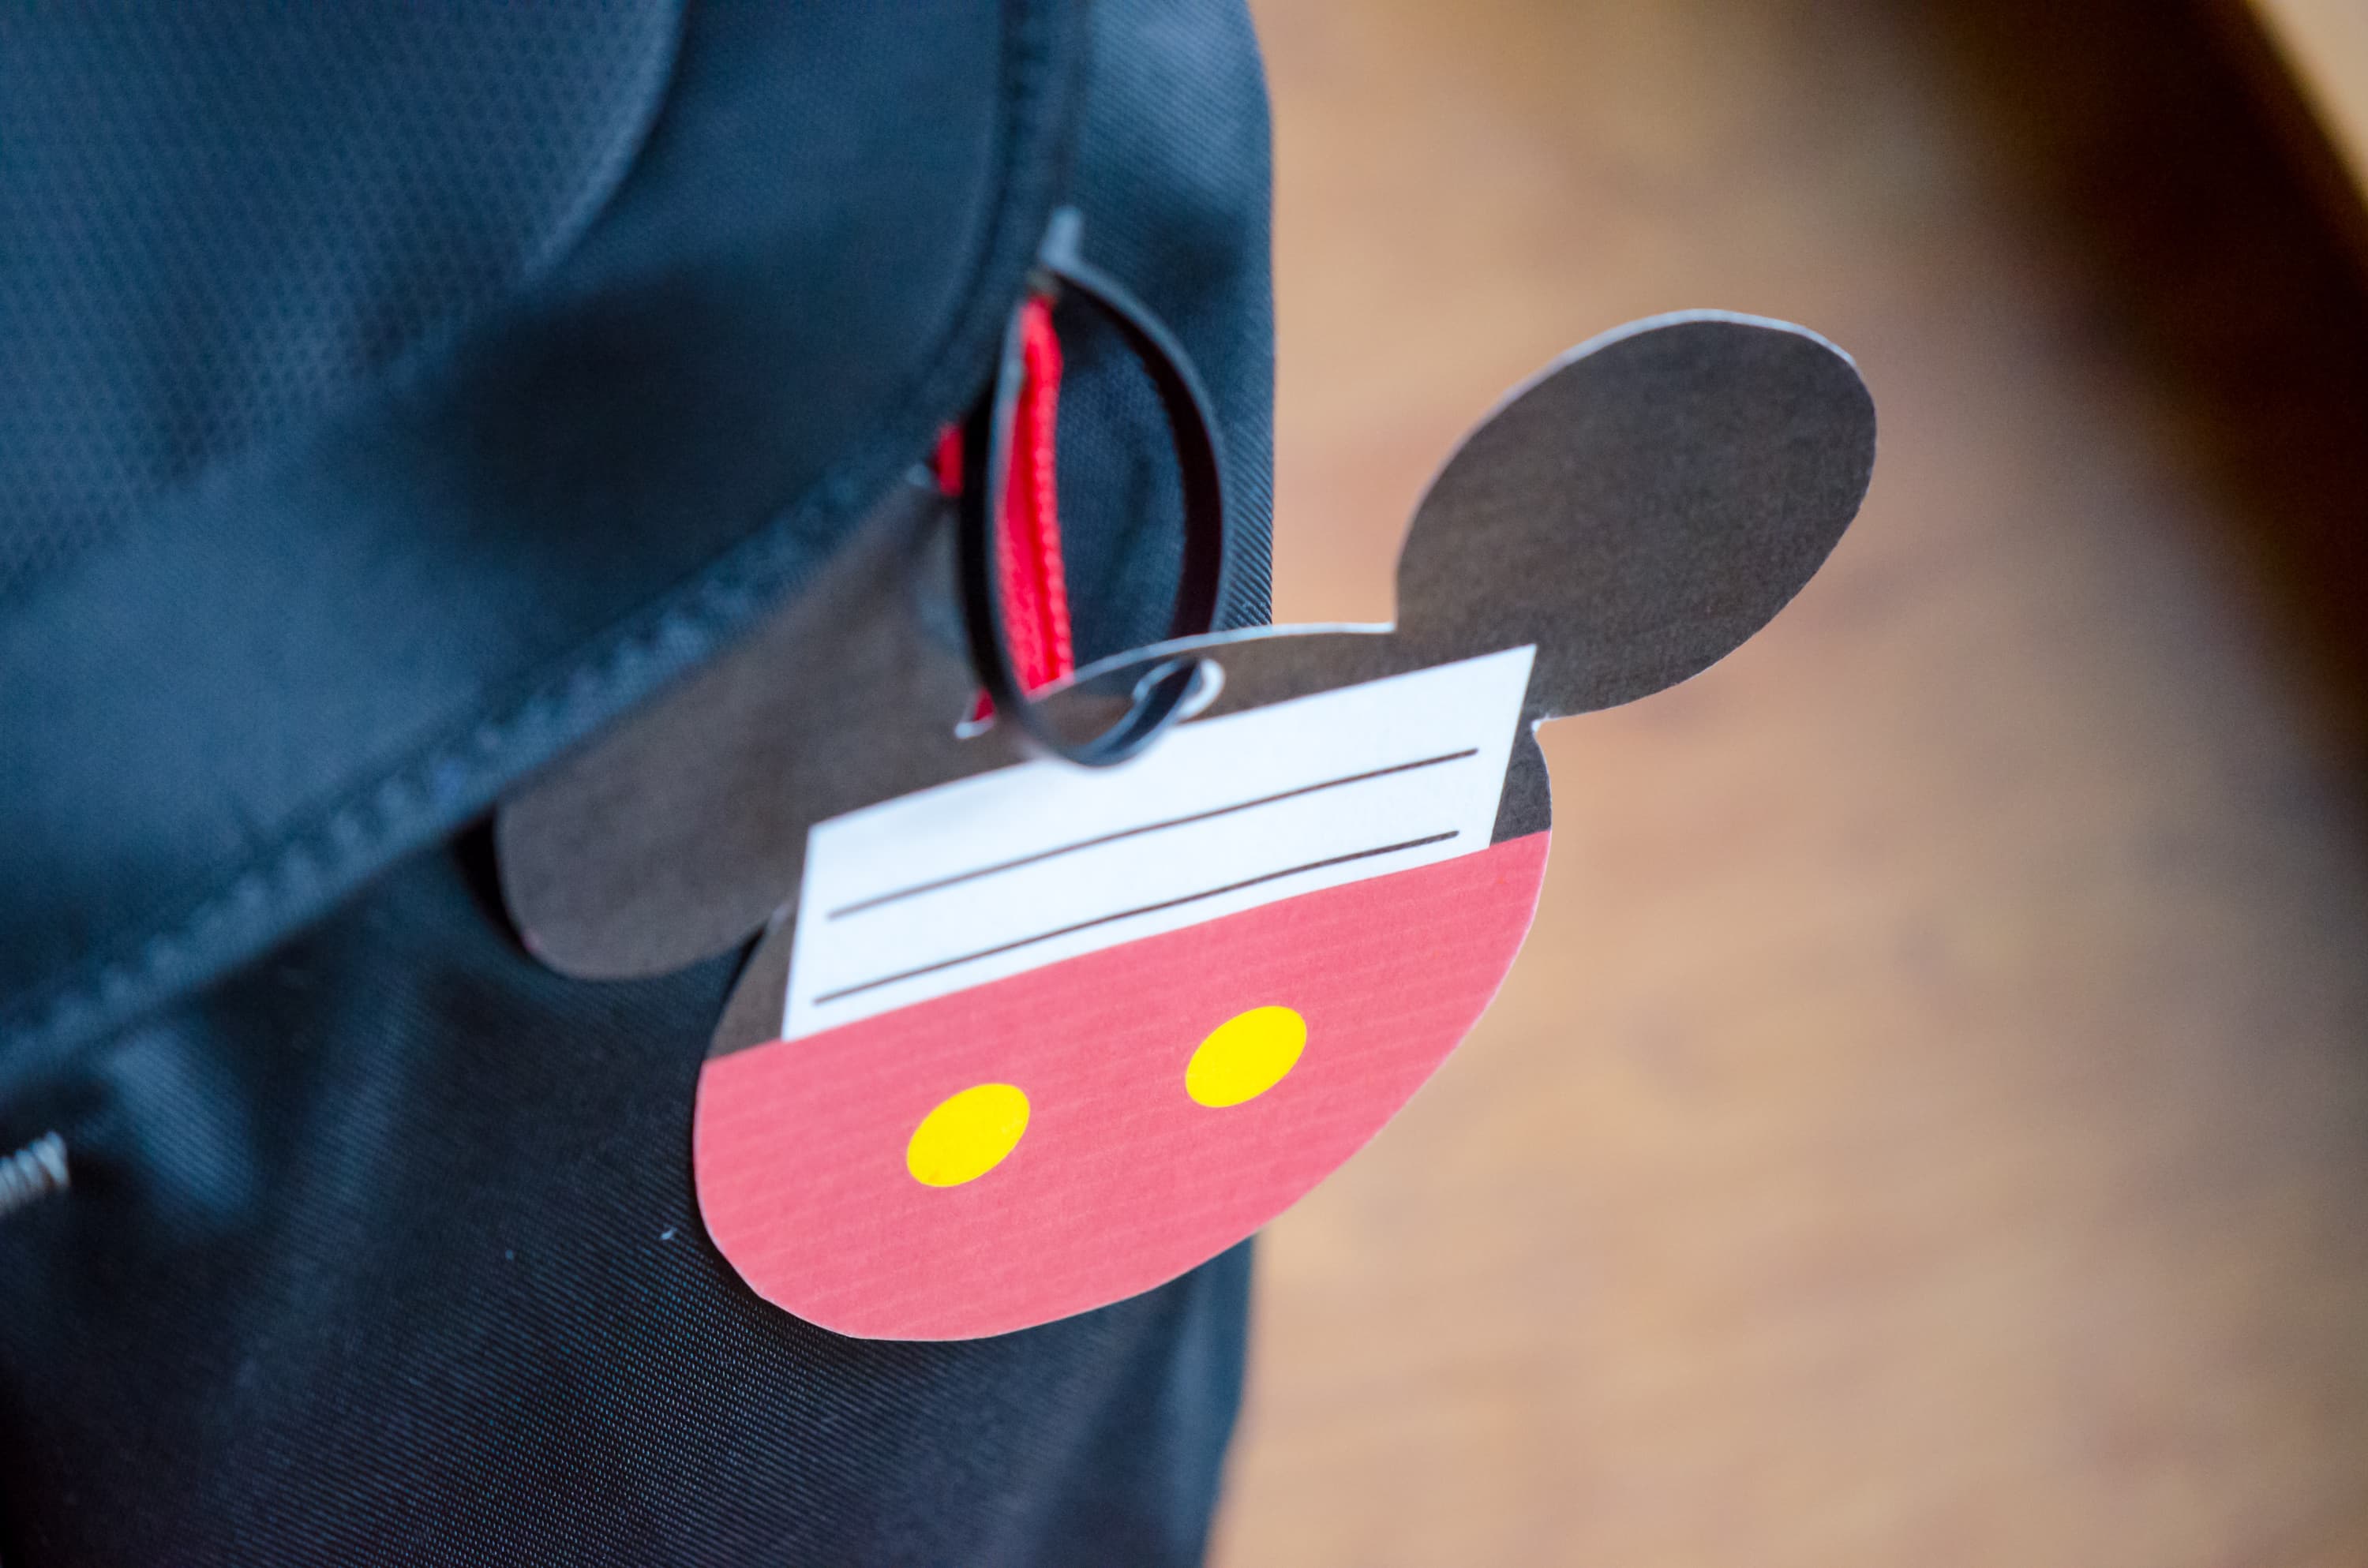 Free Printable Mickey Mouse Luggage Tags that are easy to create for your luggage on your next Disney Parks vacation.